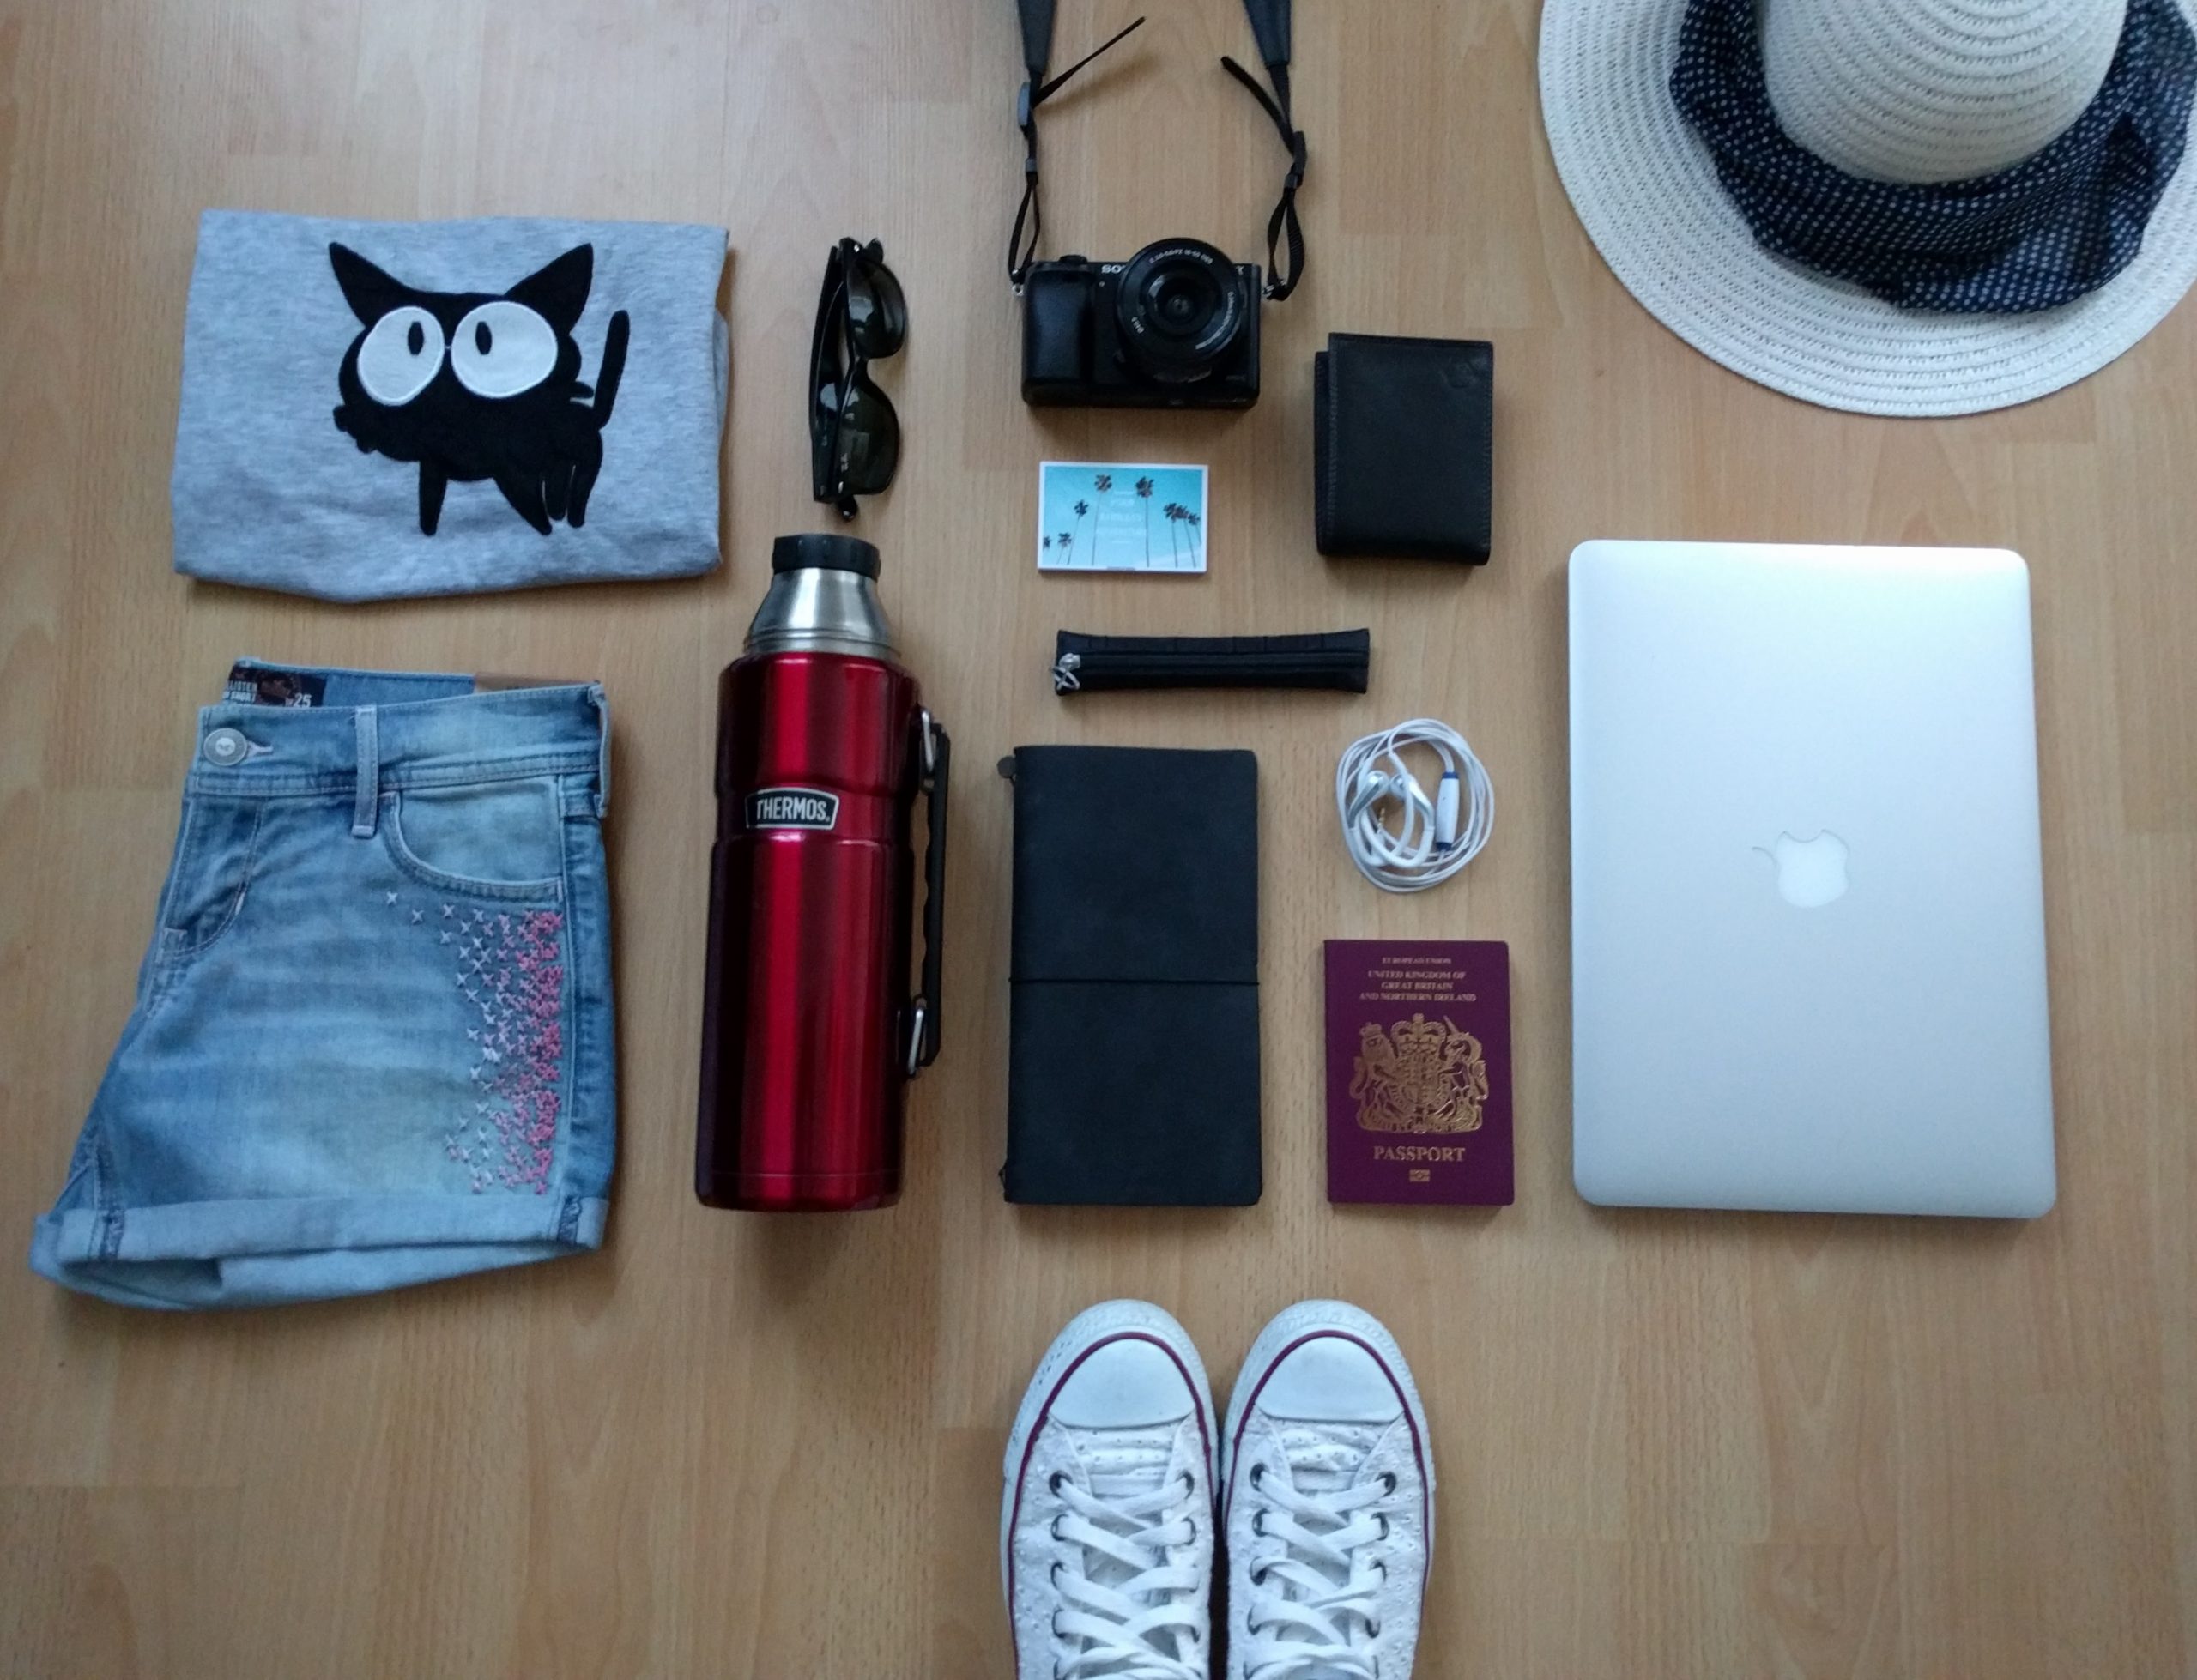 Essential packing list for anywhere we go so we can work remotely on the laptop